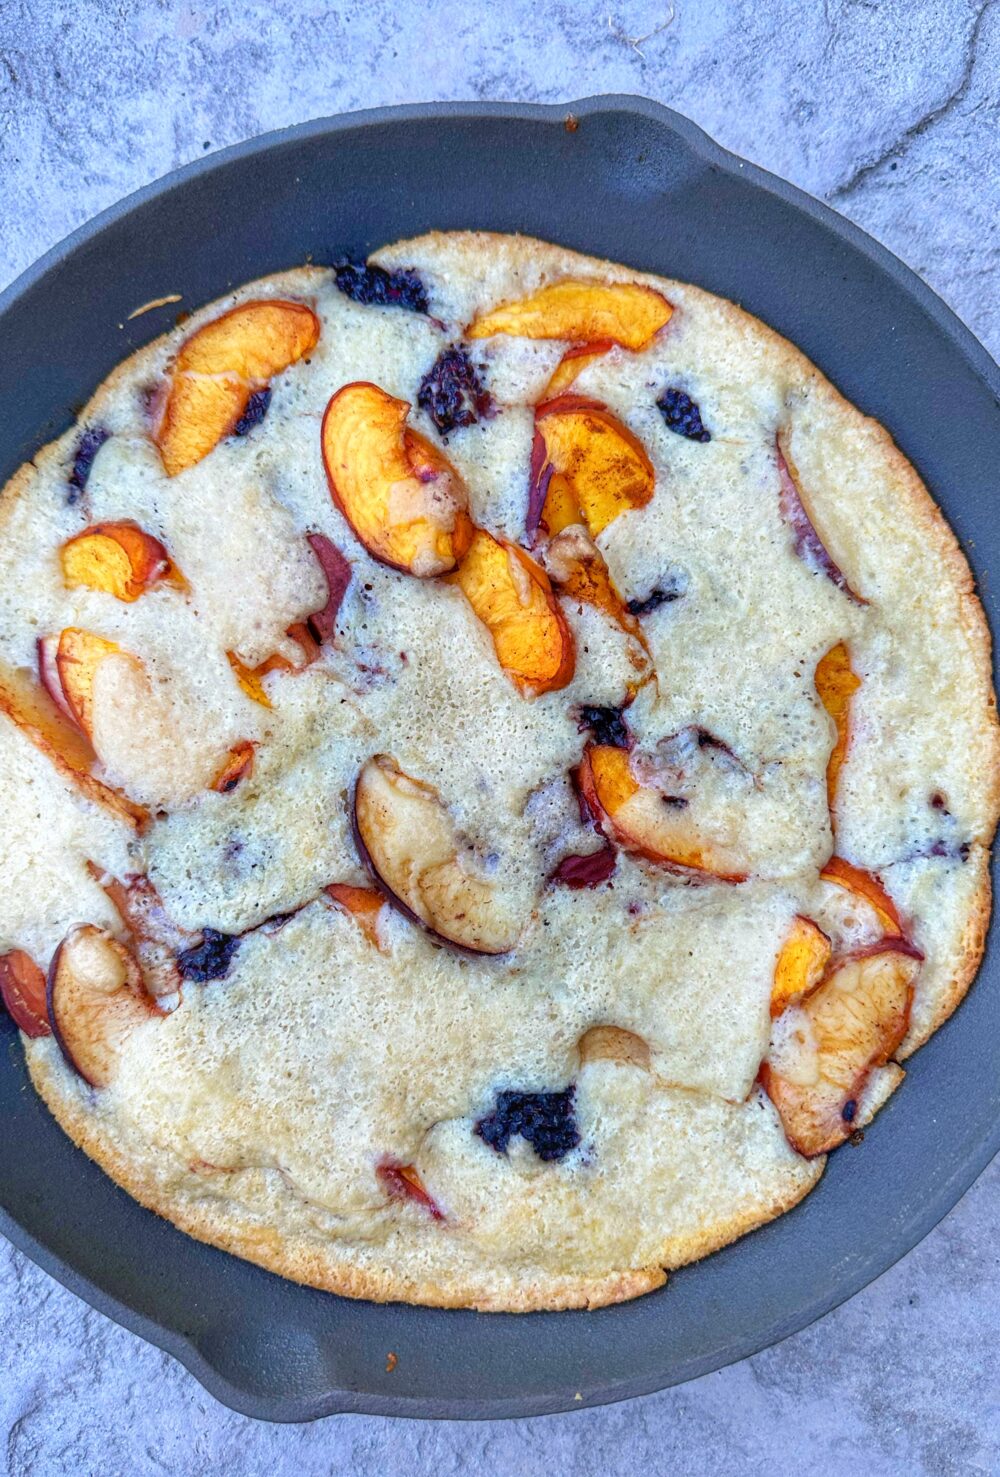 Peach and blackberry cobbler in a cast iron skillet.